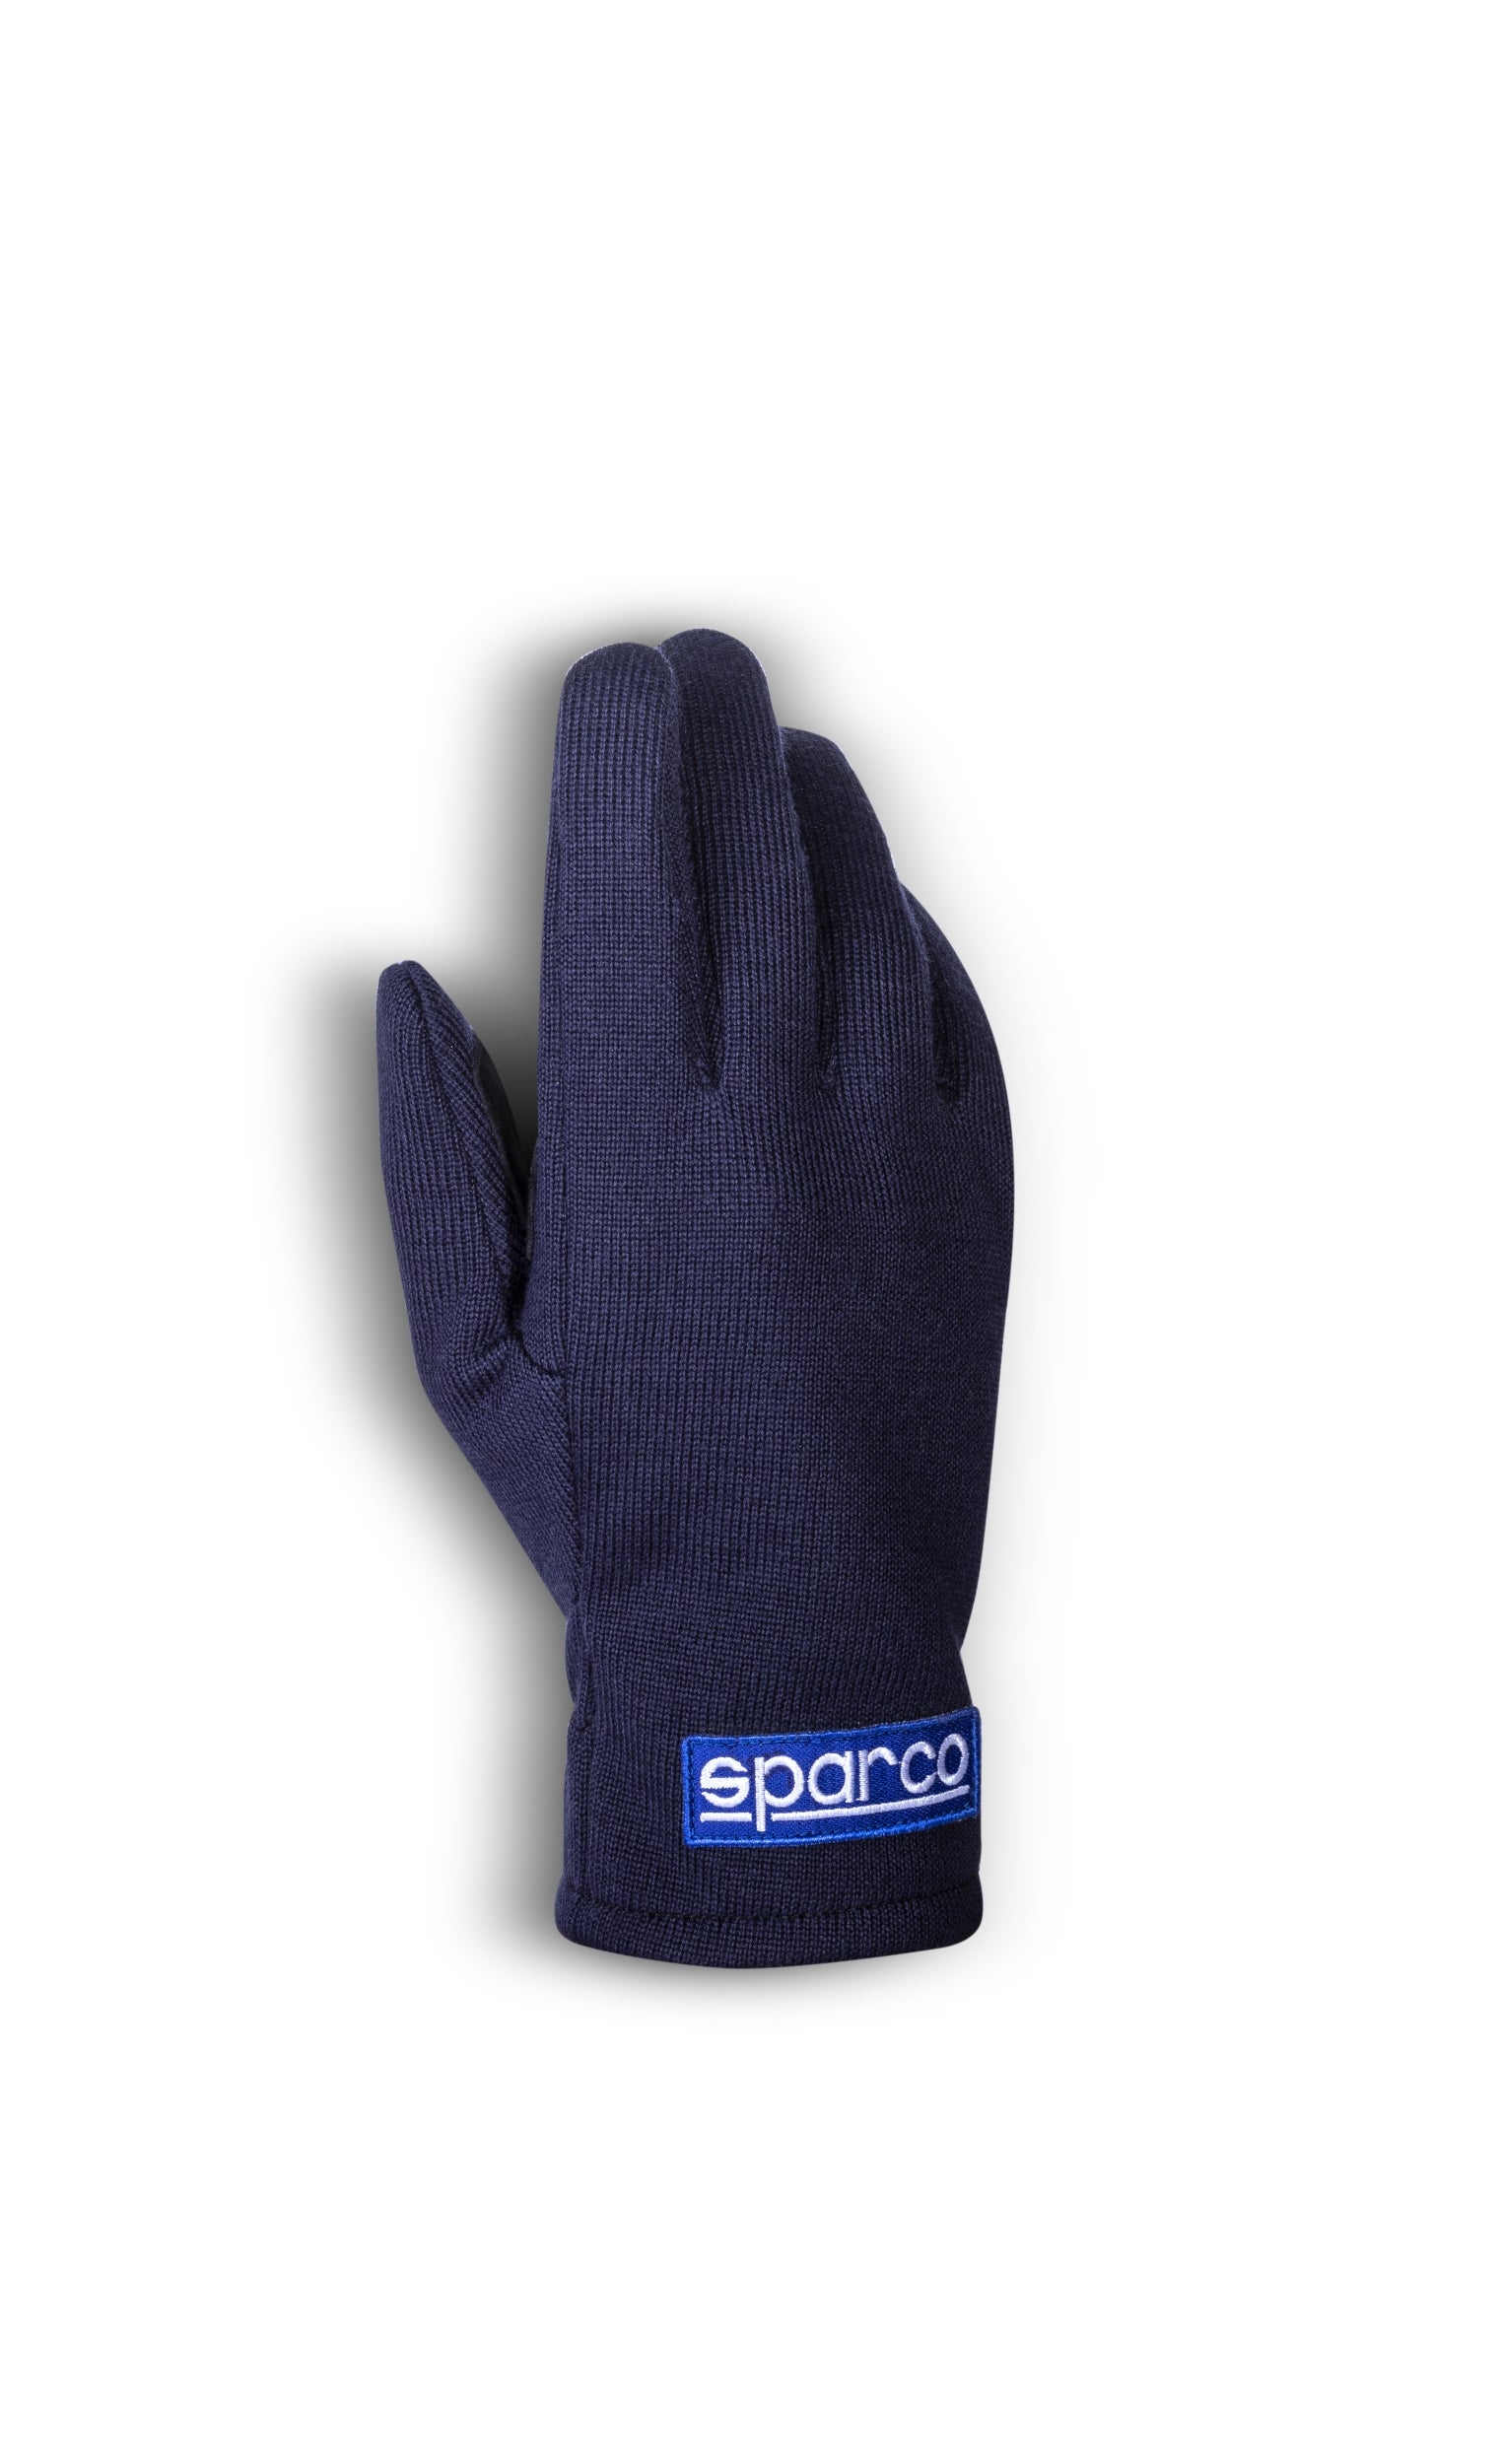 SPARCO 00208210BM NEW WOOL SPORTDRIVE Gloves, navy blue, size 10 Photo-0 